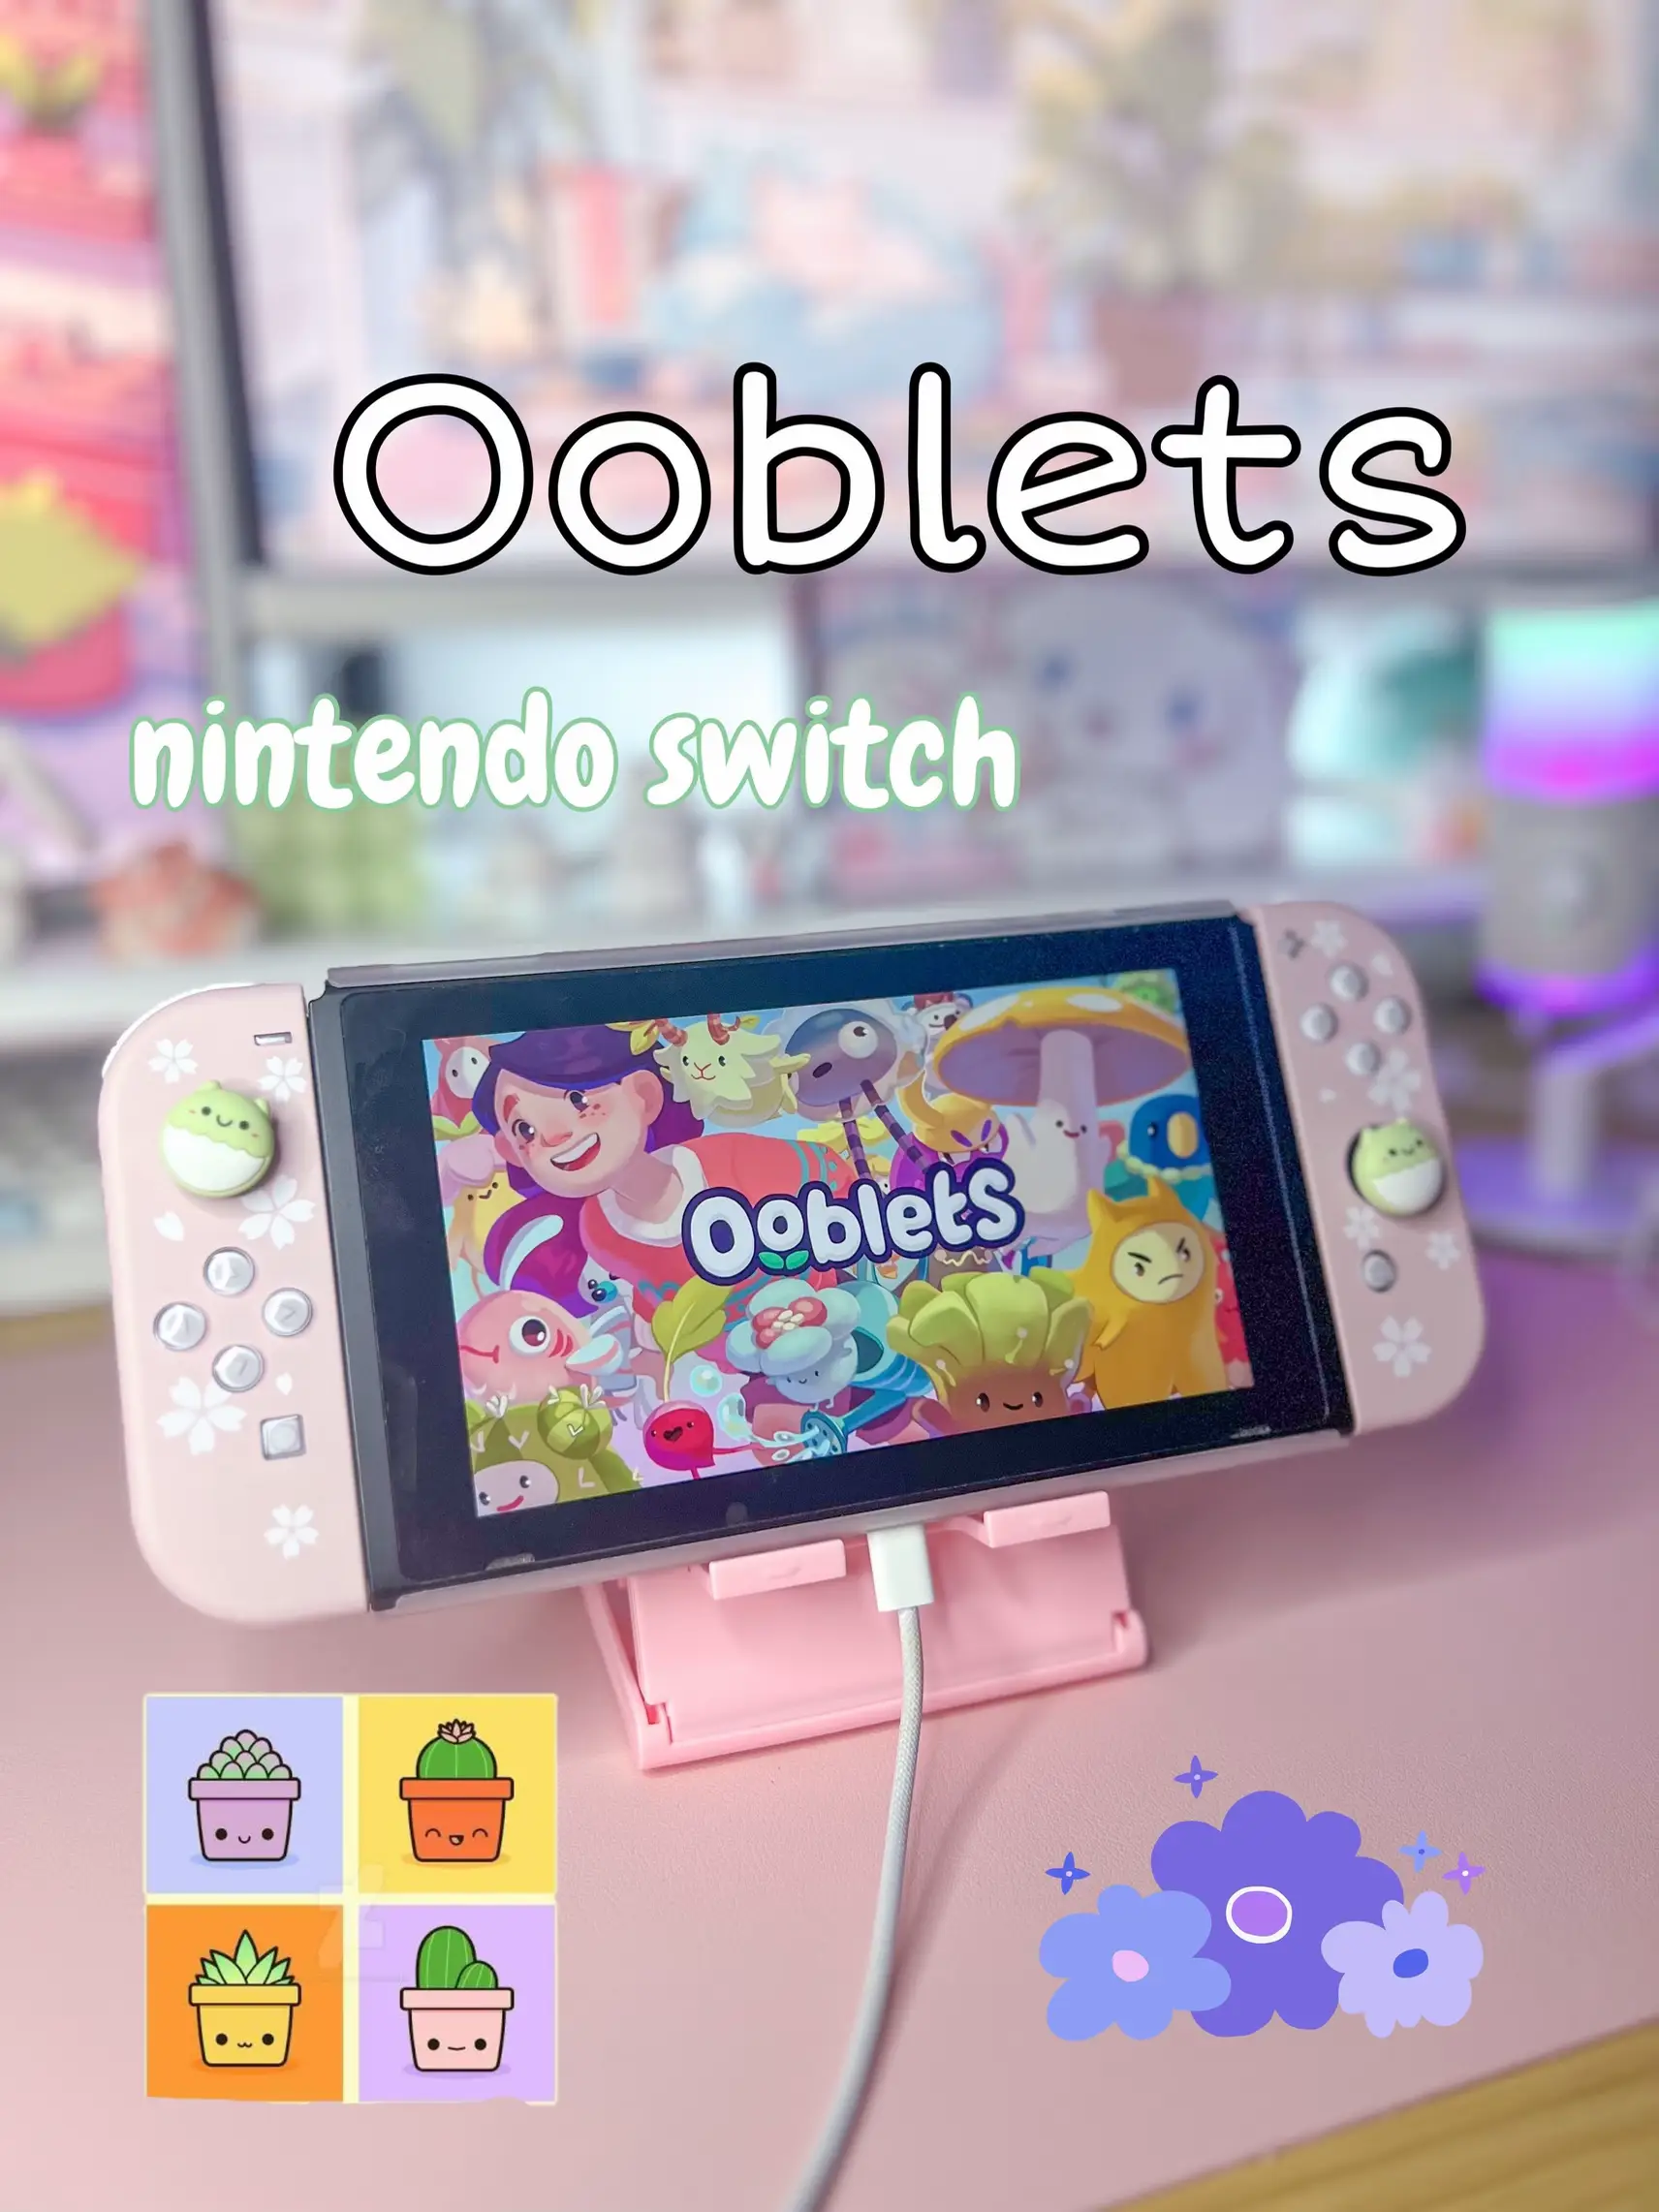 ooblets nintendo switch | Lemon8 Gallery nikki posted by 